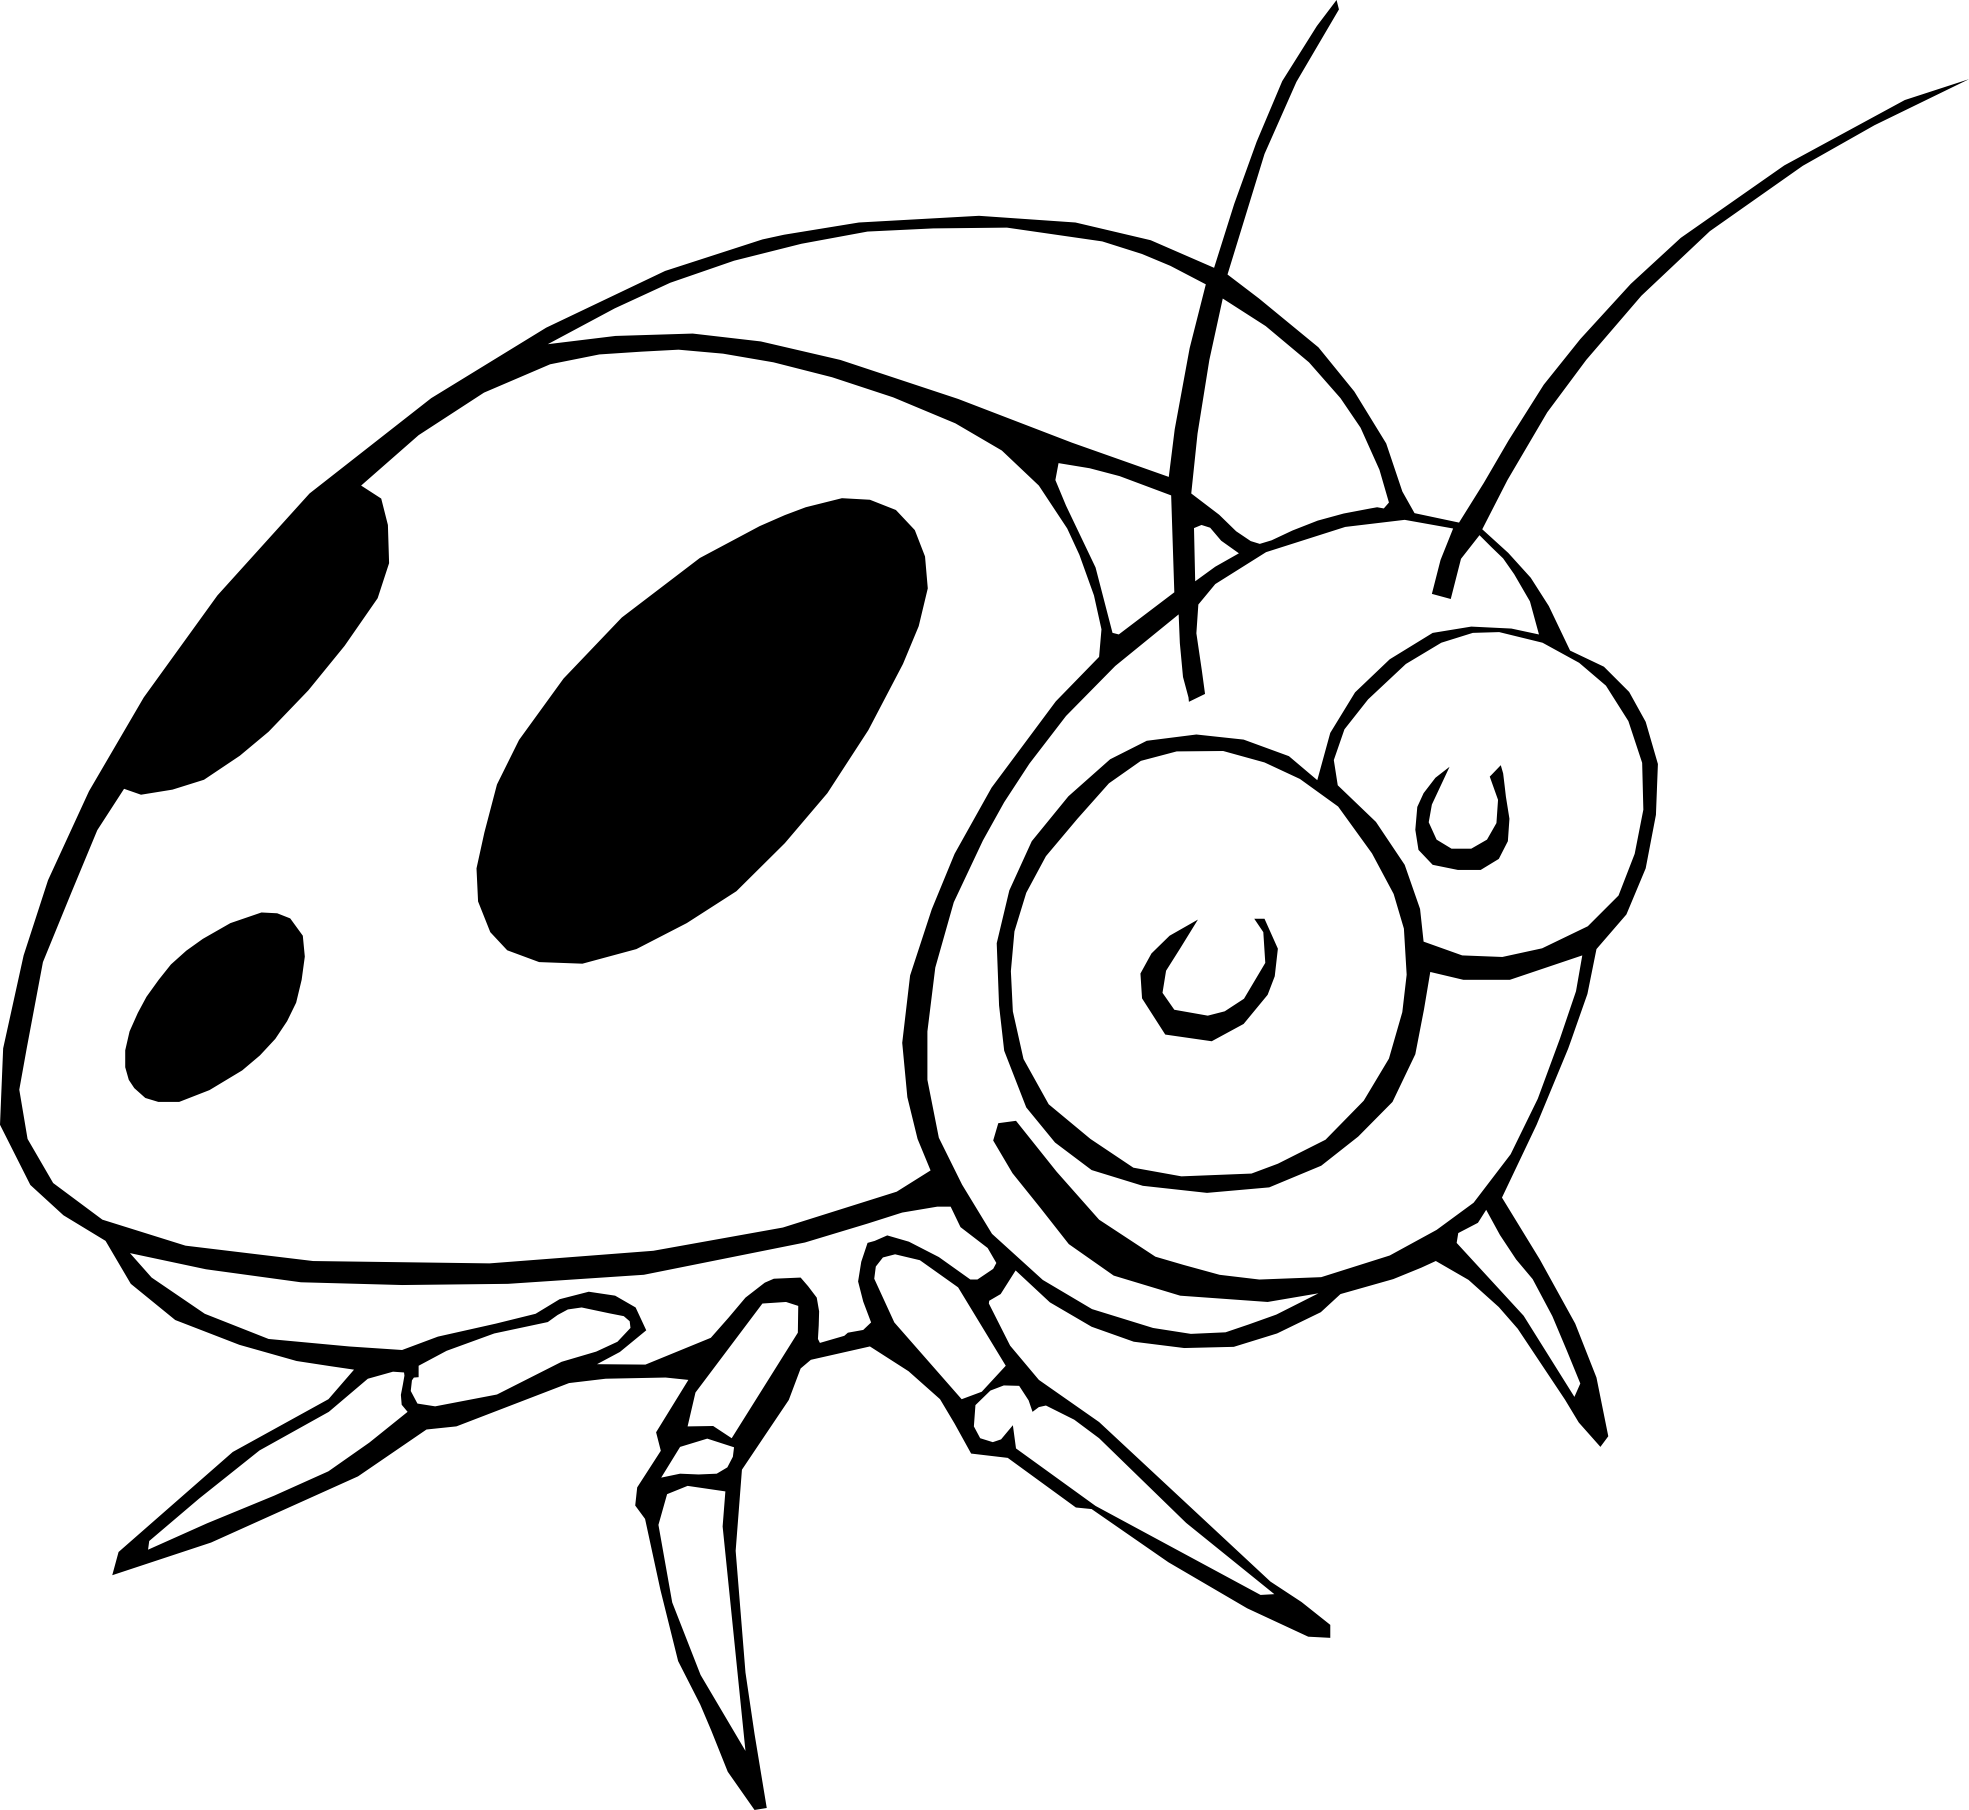 free black and white clip art bugs - photo #32